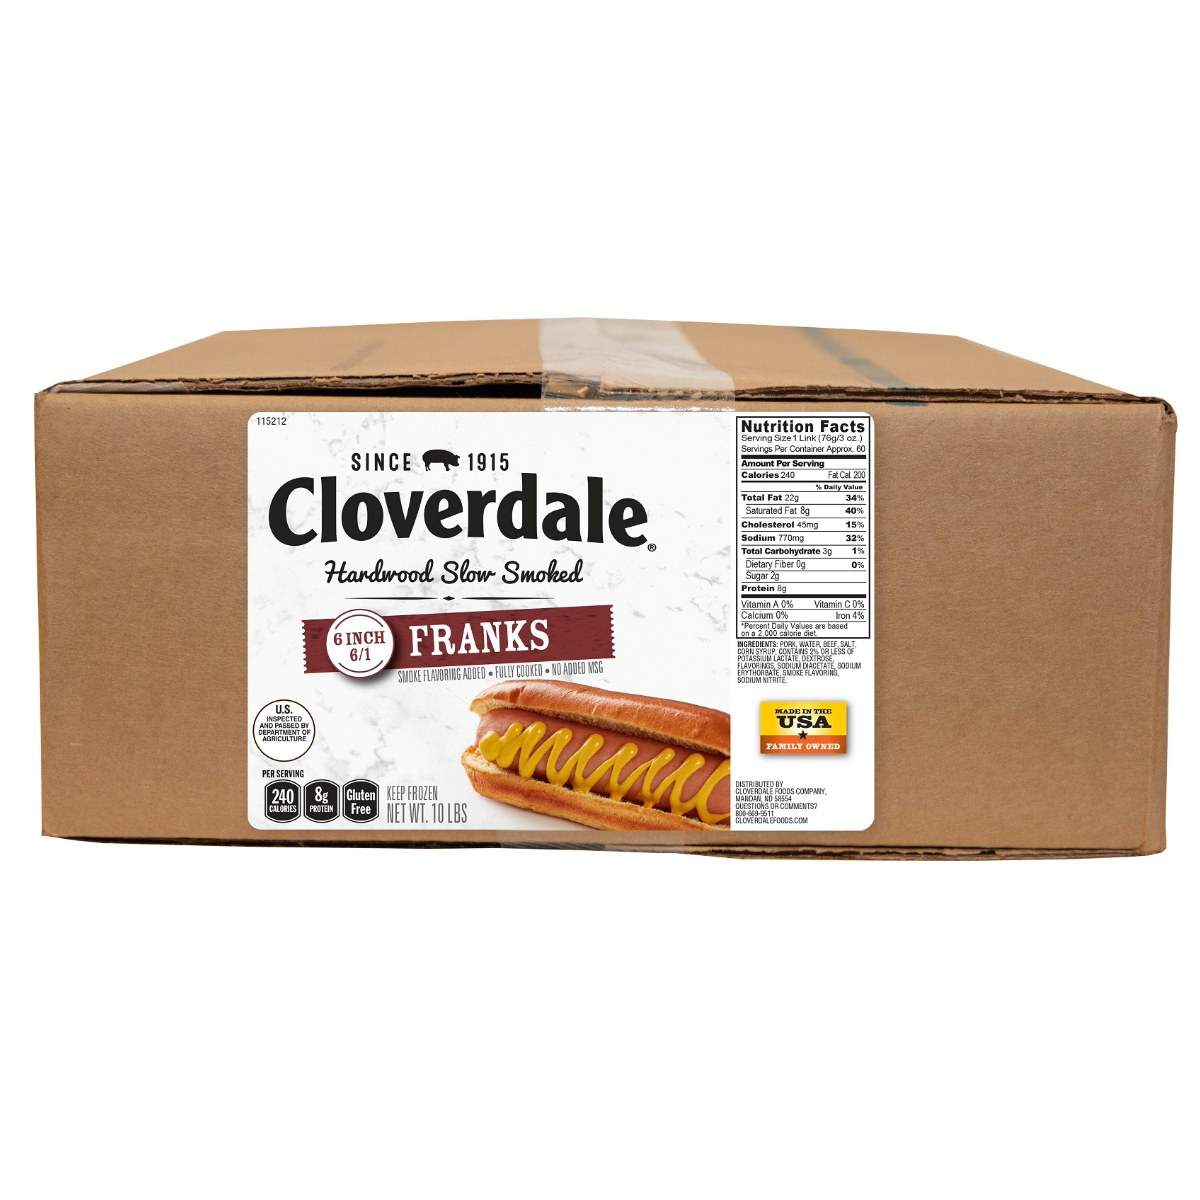 CLOVERDALE MEAT HOT DOGS 6 INCH 6/1 FRANKS